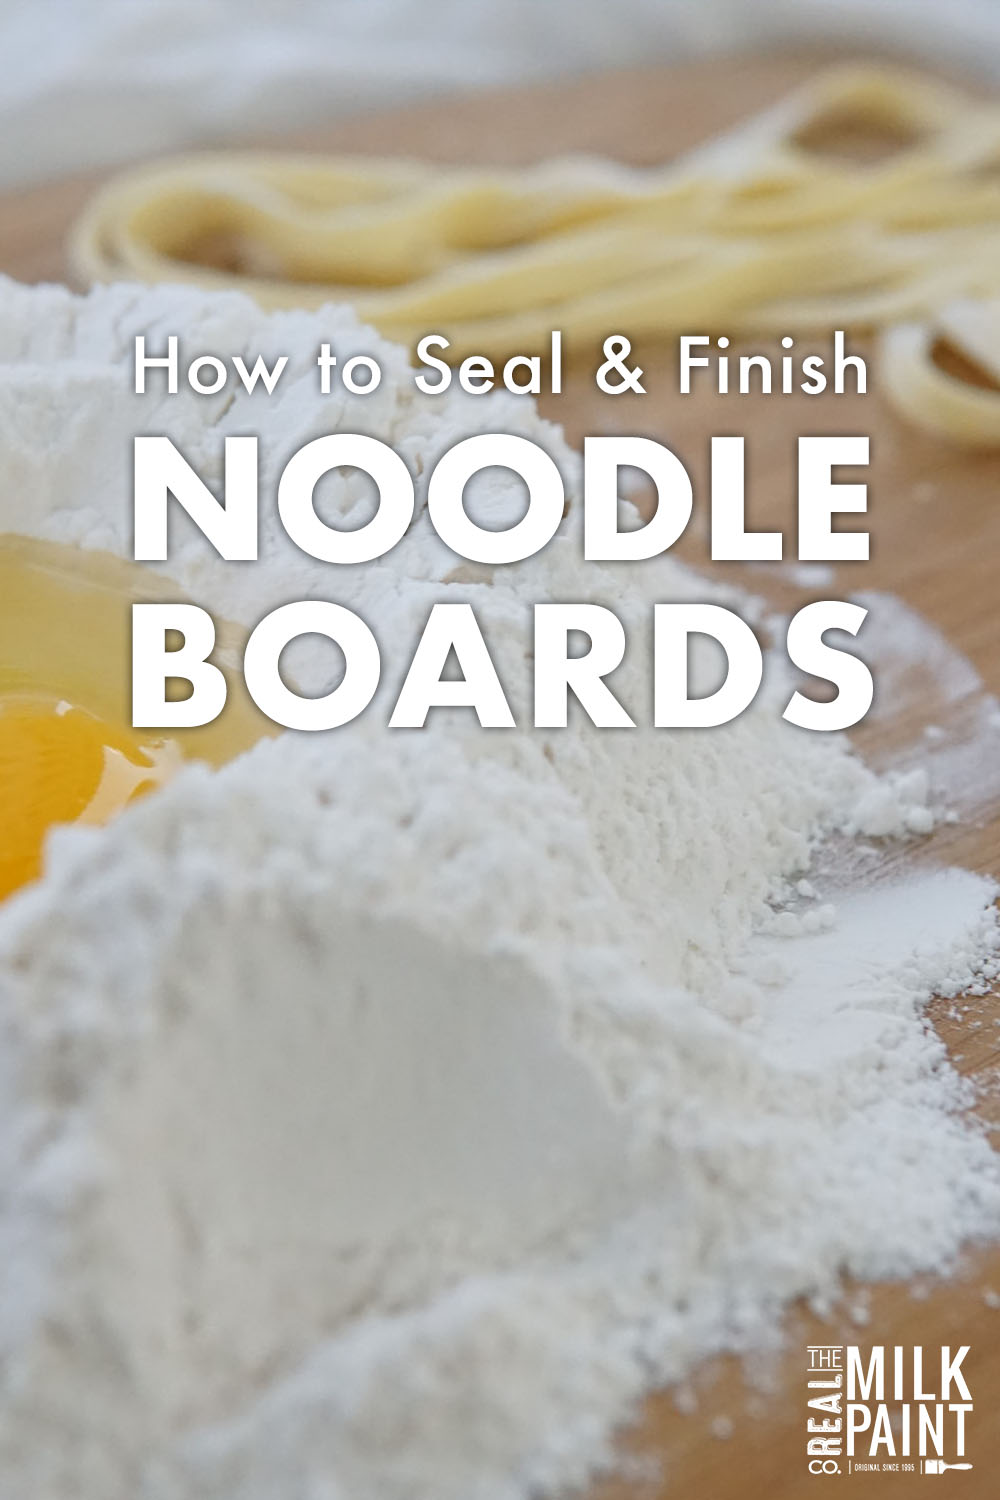 More Than Just a Noodle Board